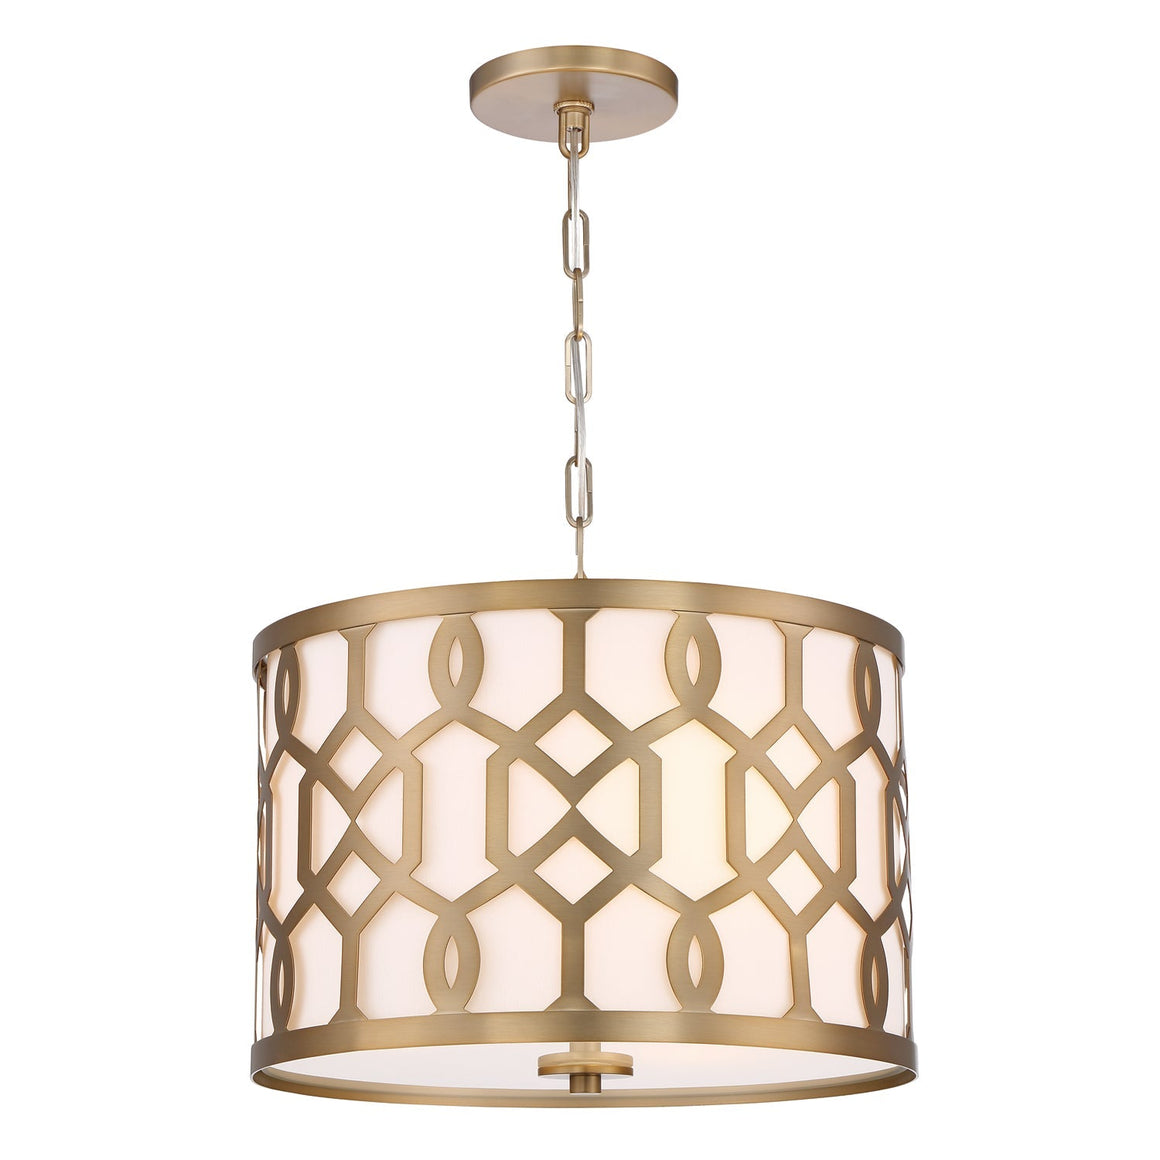 Libby Langdon for Crystorama Jennings 3 Light Aged Brass Chandelier